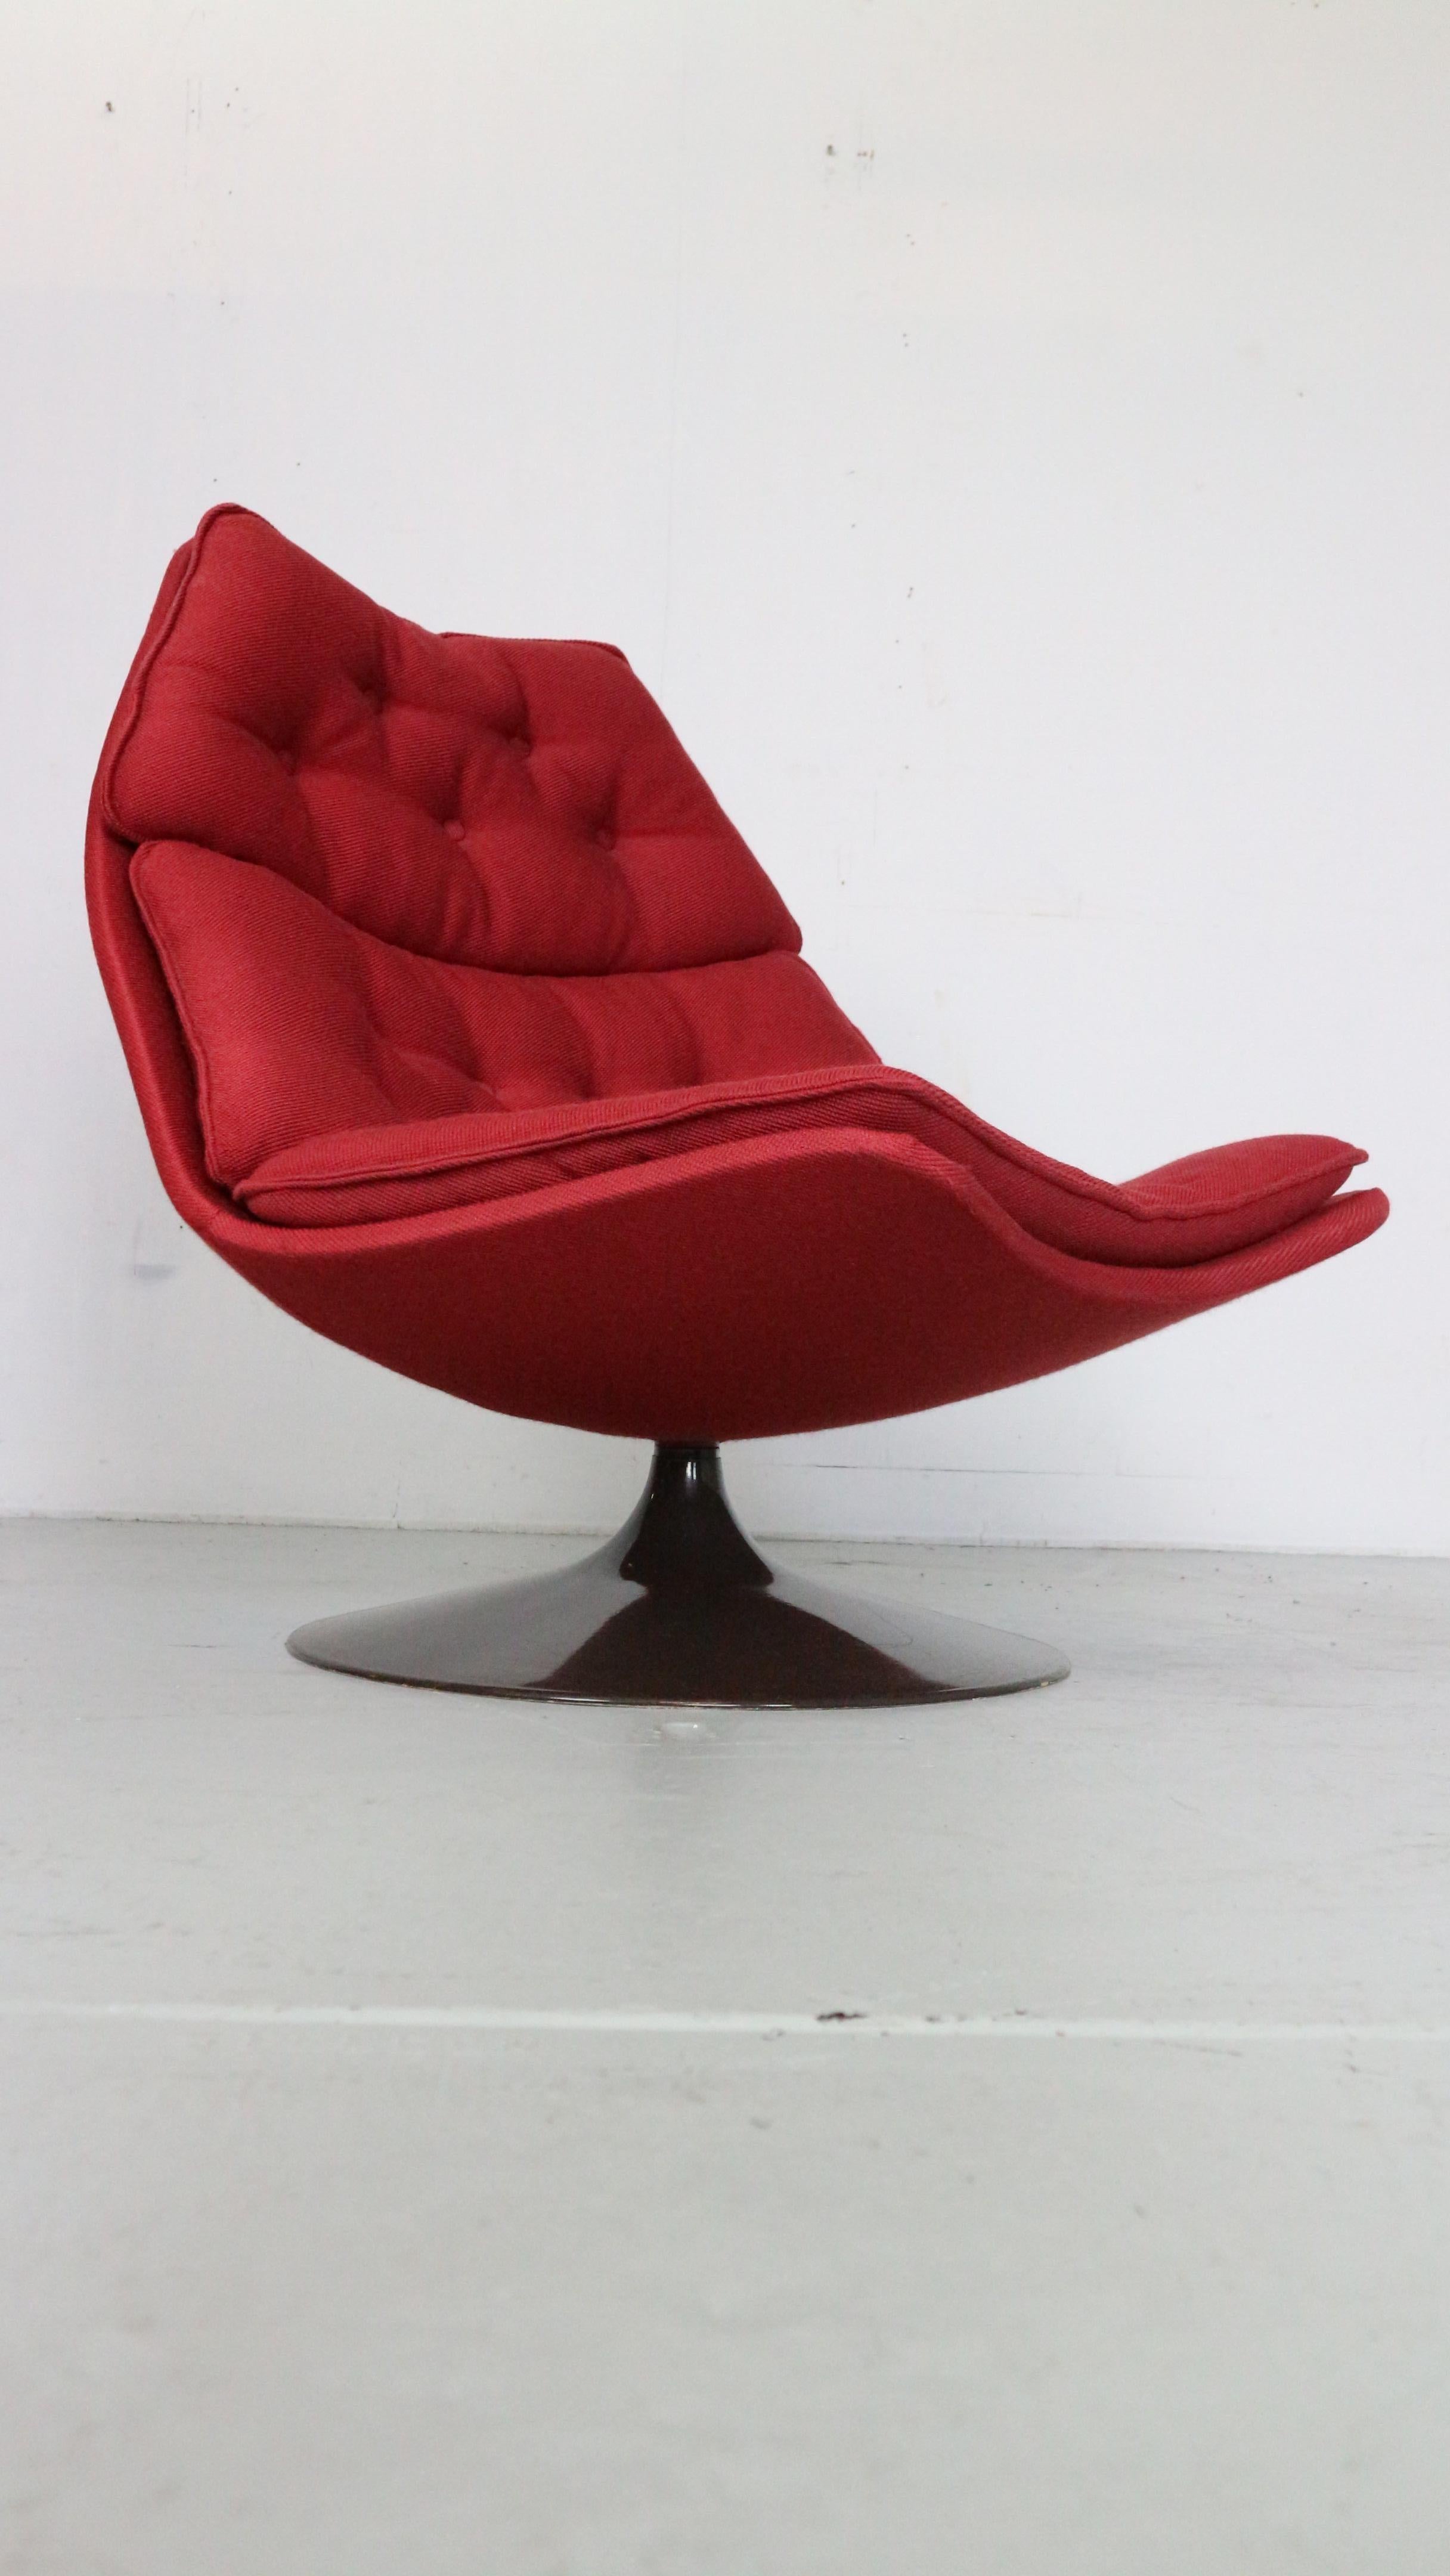 Mid-Century Modern swivel lounge chair designed by Geoffrey Harcourt for famous Dutch furniture manufacture Artifort in 1967s.
In 1962 British designer Geoffrey Harcourt (1935) joined the Artifort team, and developed the luxury ‘F-series’ lounge